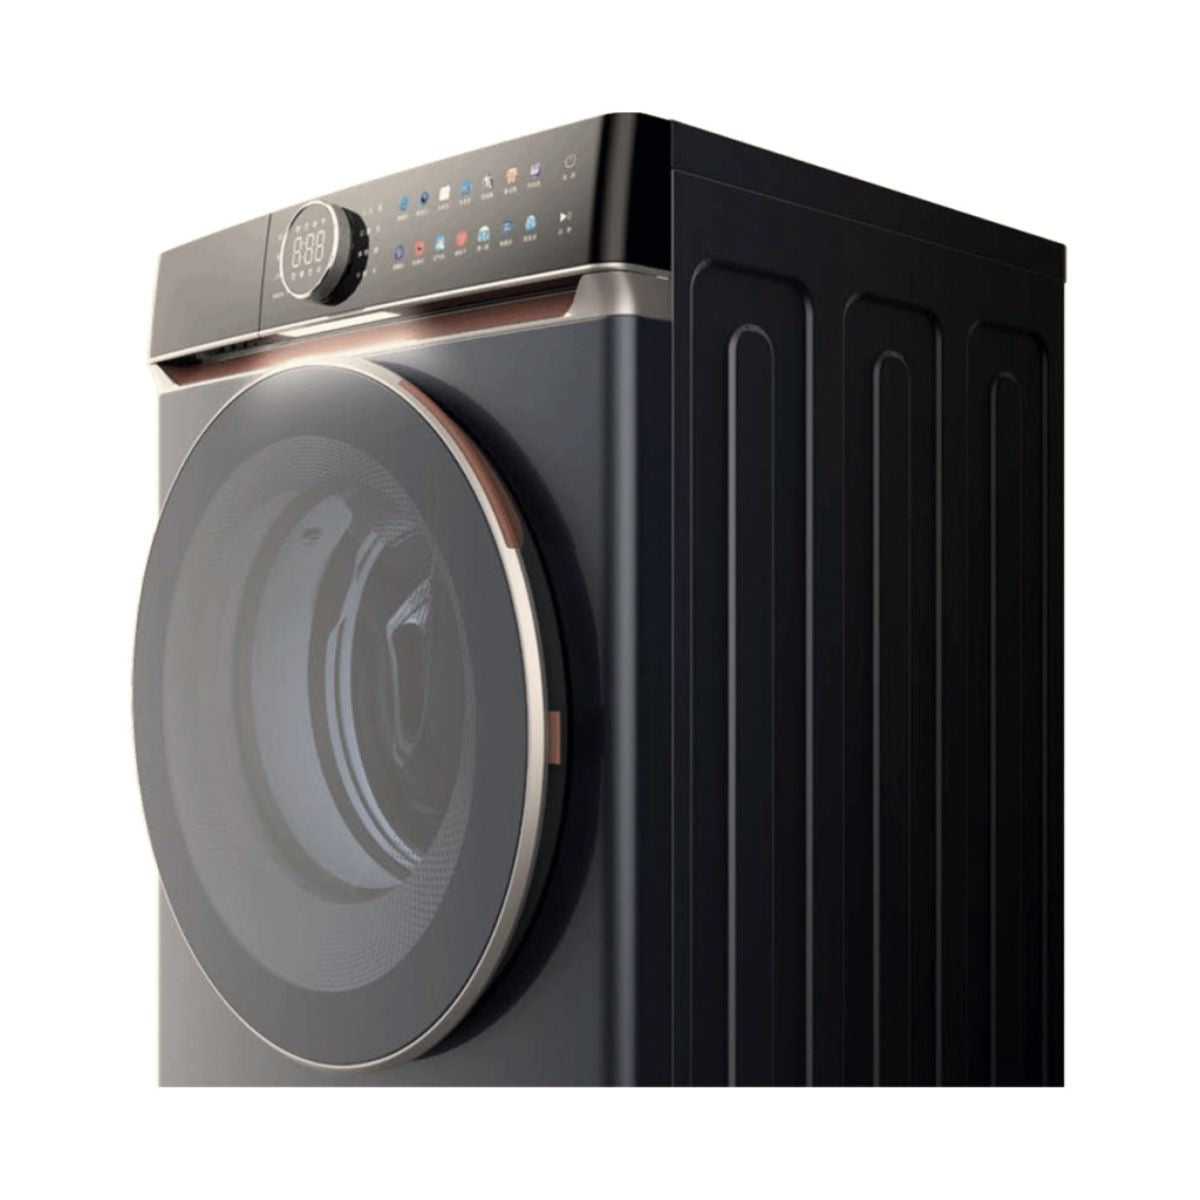 Bruhm  10kg Front Load Washing Machine  -  BWF-100S - (BMW DESIGN - Touch Screen)